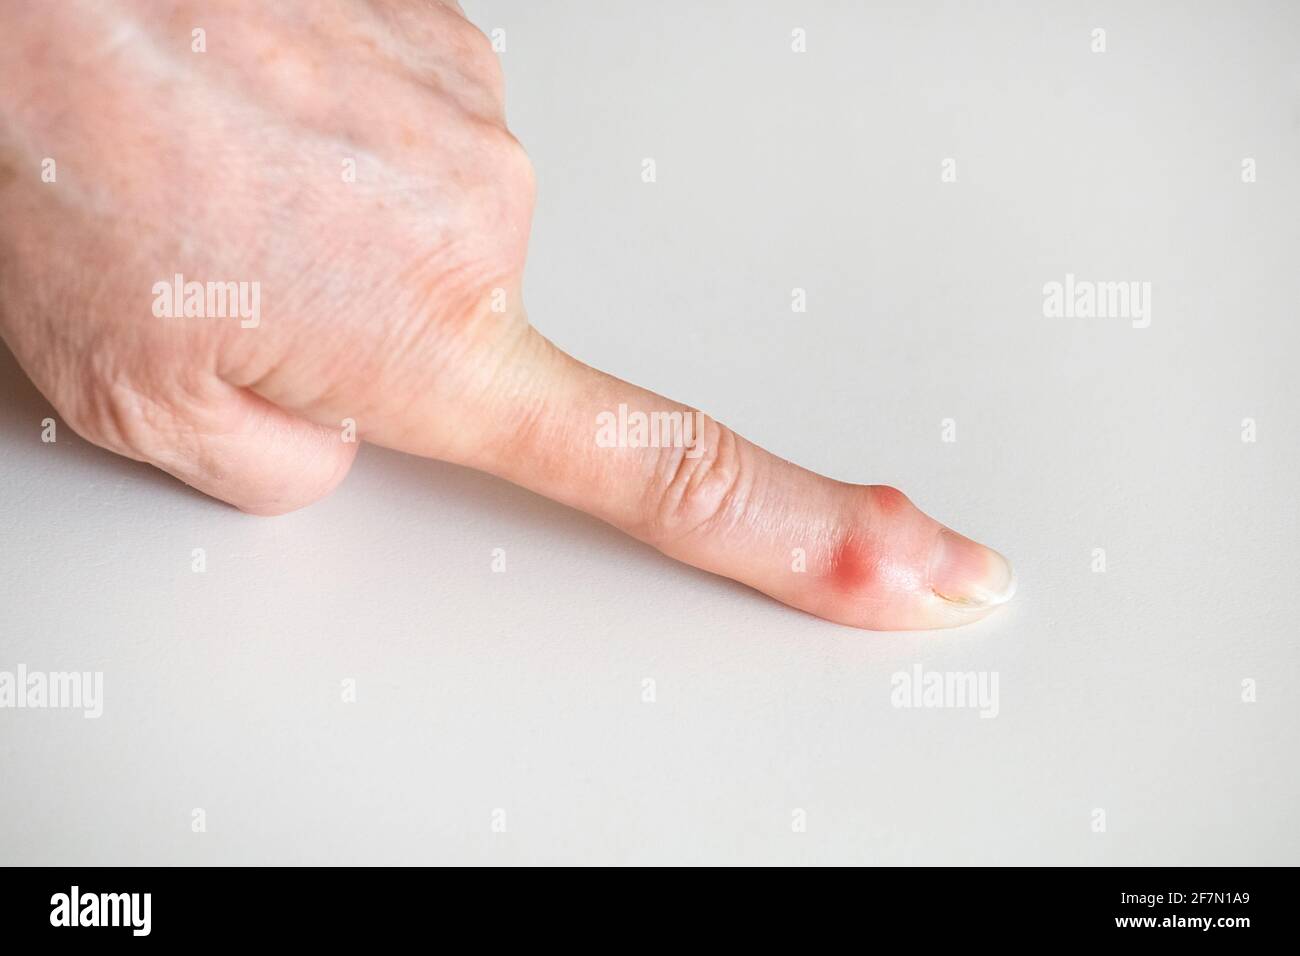 Sick female fingers of an elderly man's hands on a white background. Stock Photo